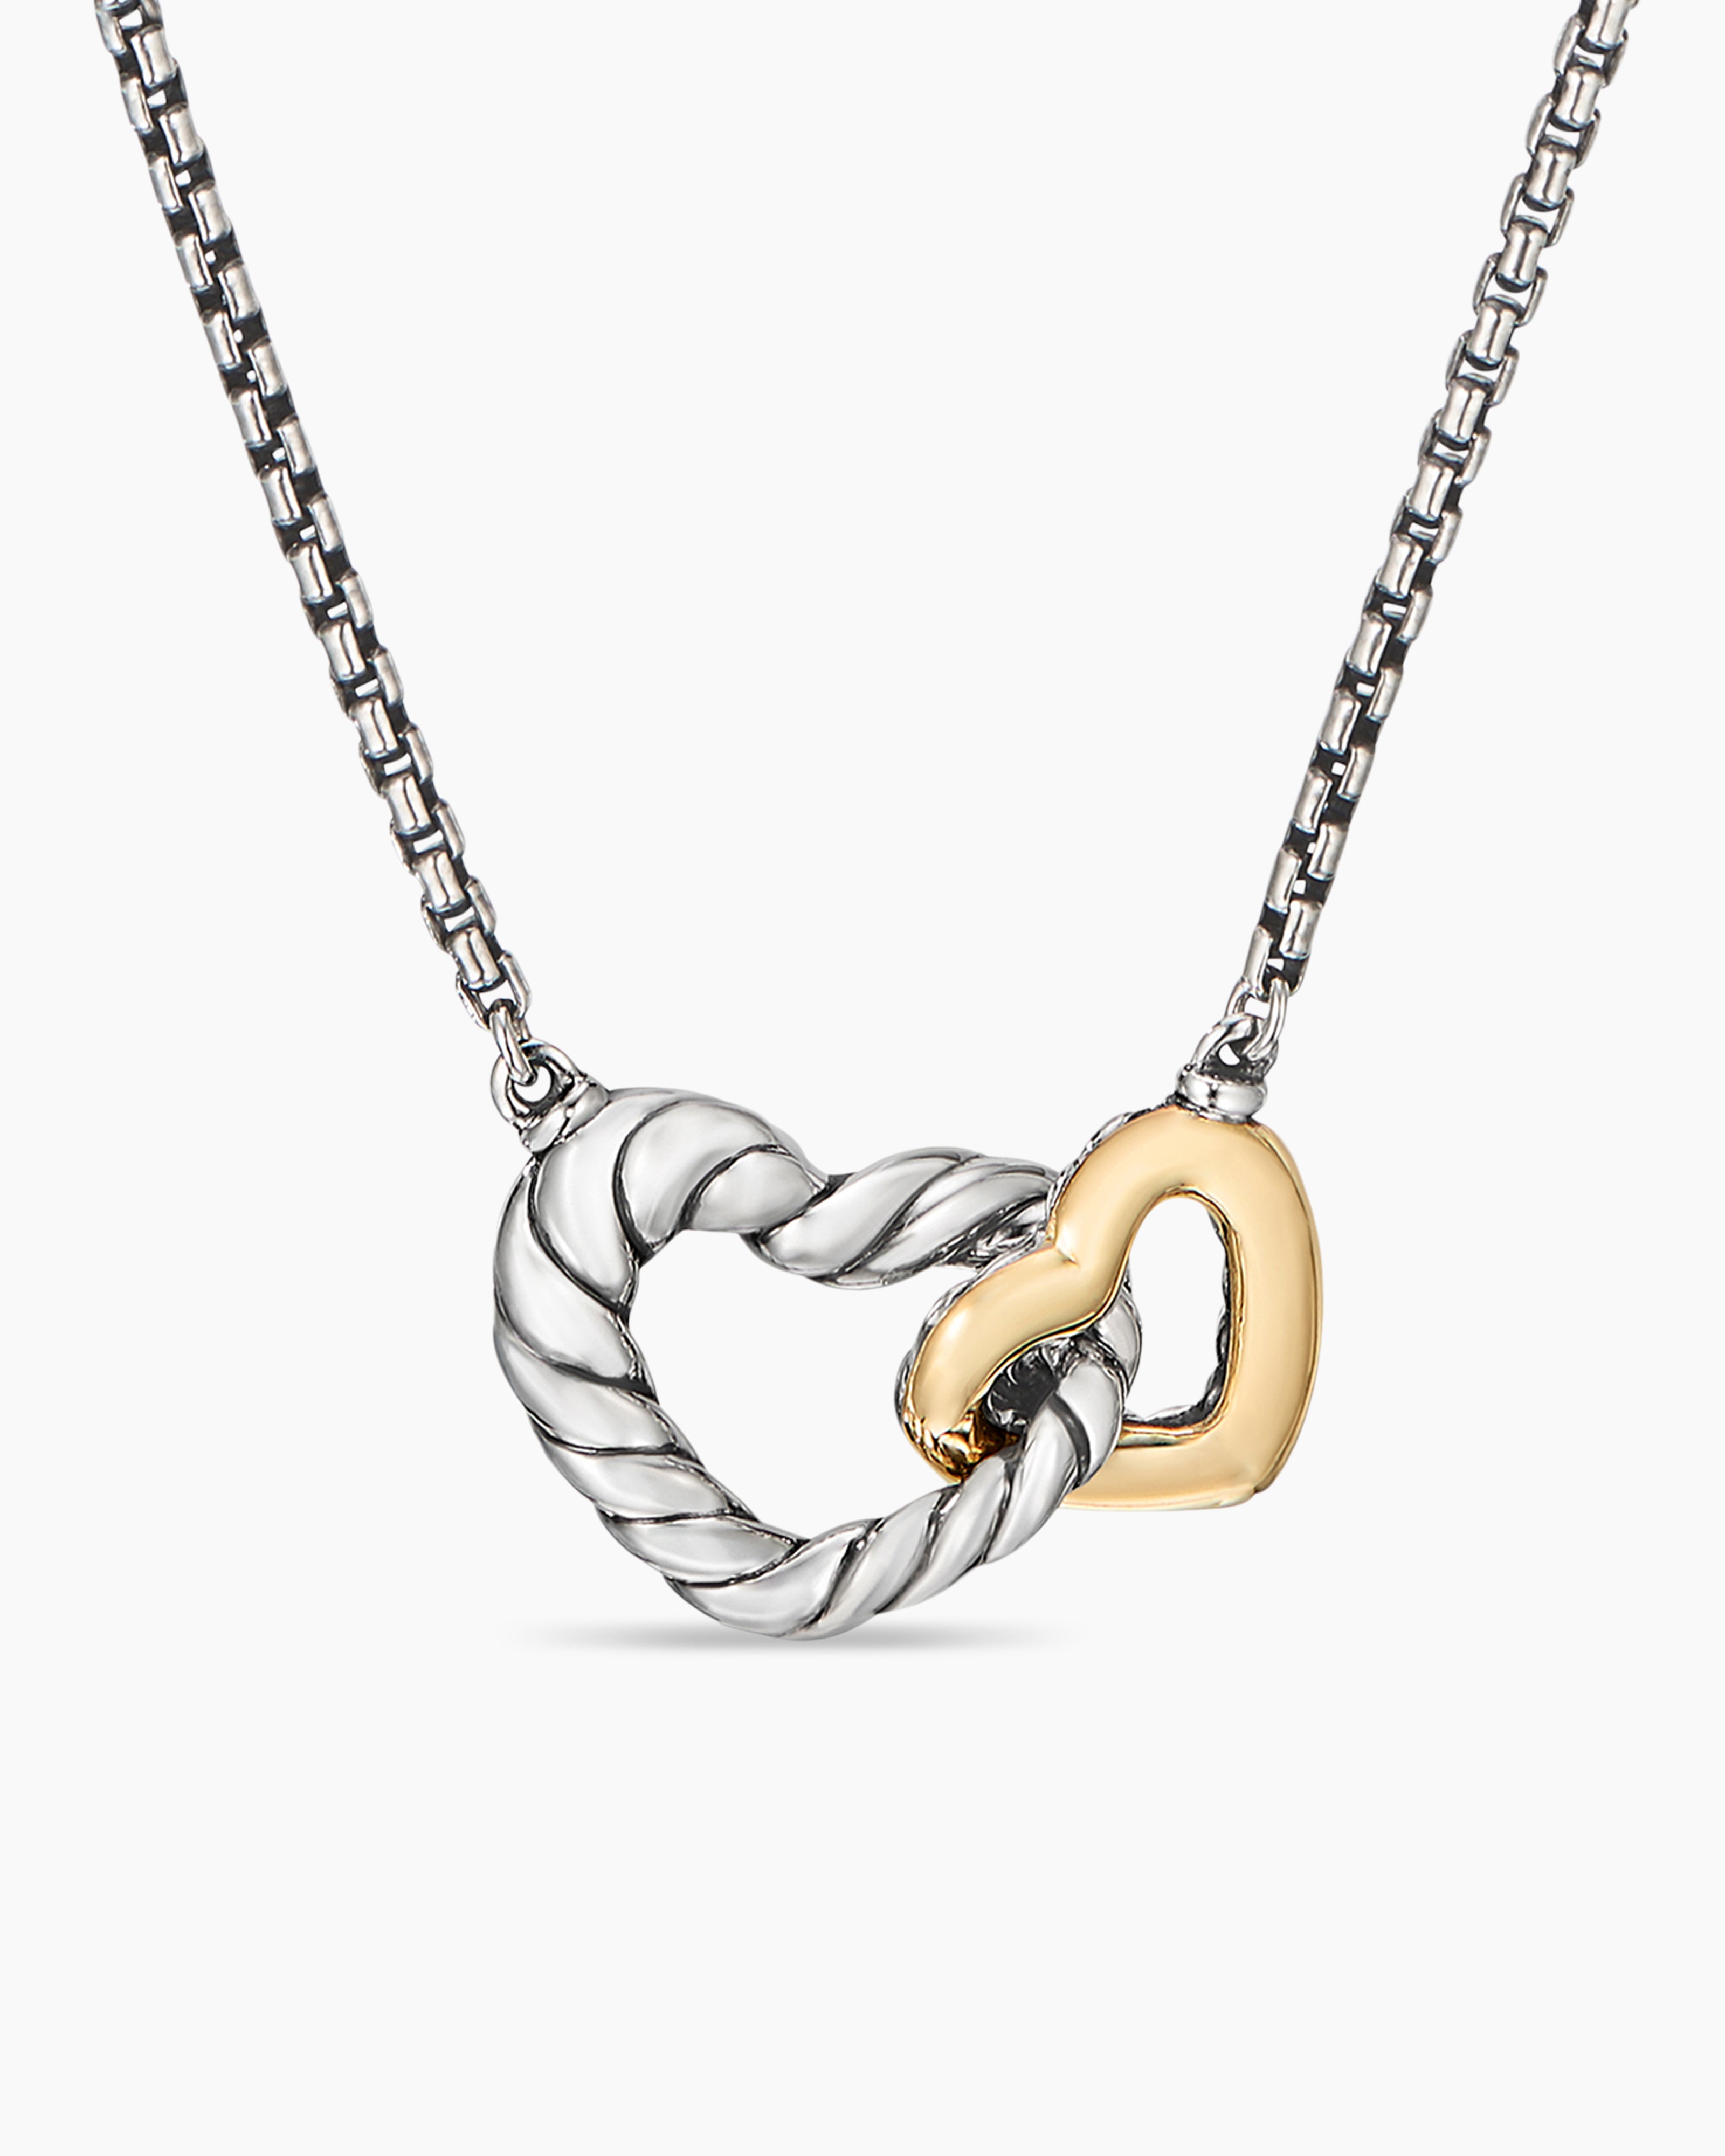 Sterling Intertwined Hearts Necklace: Gold Or Silver - Nissa Jewelry